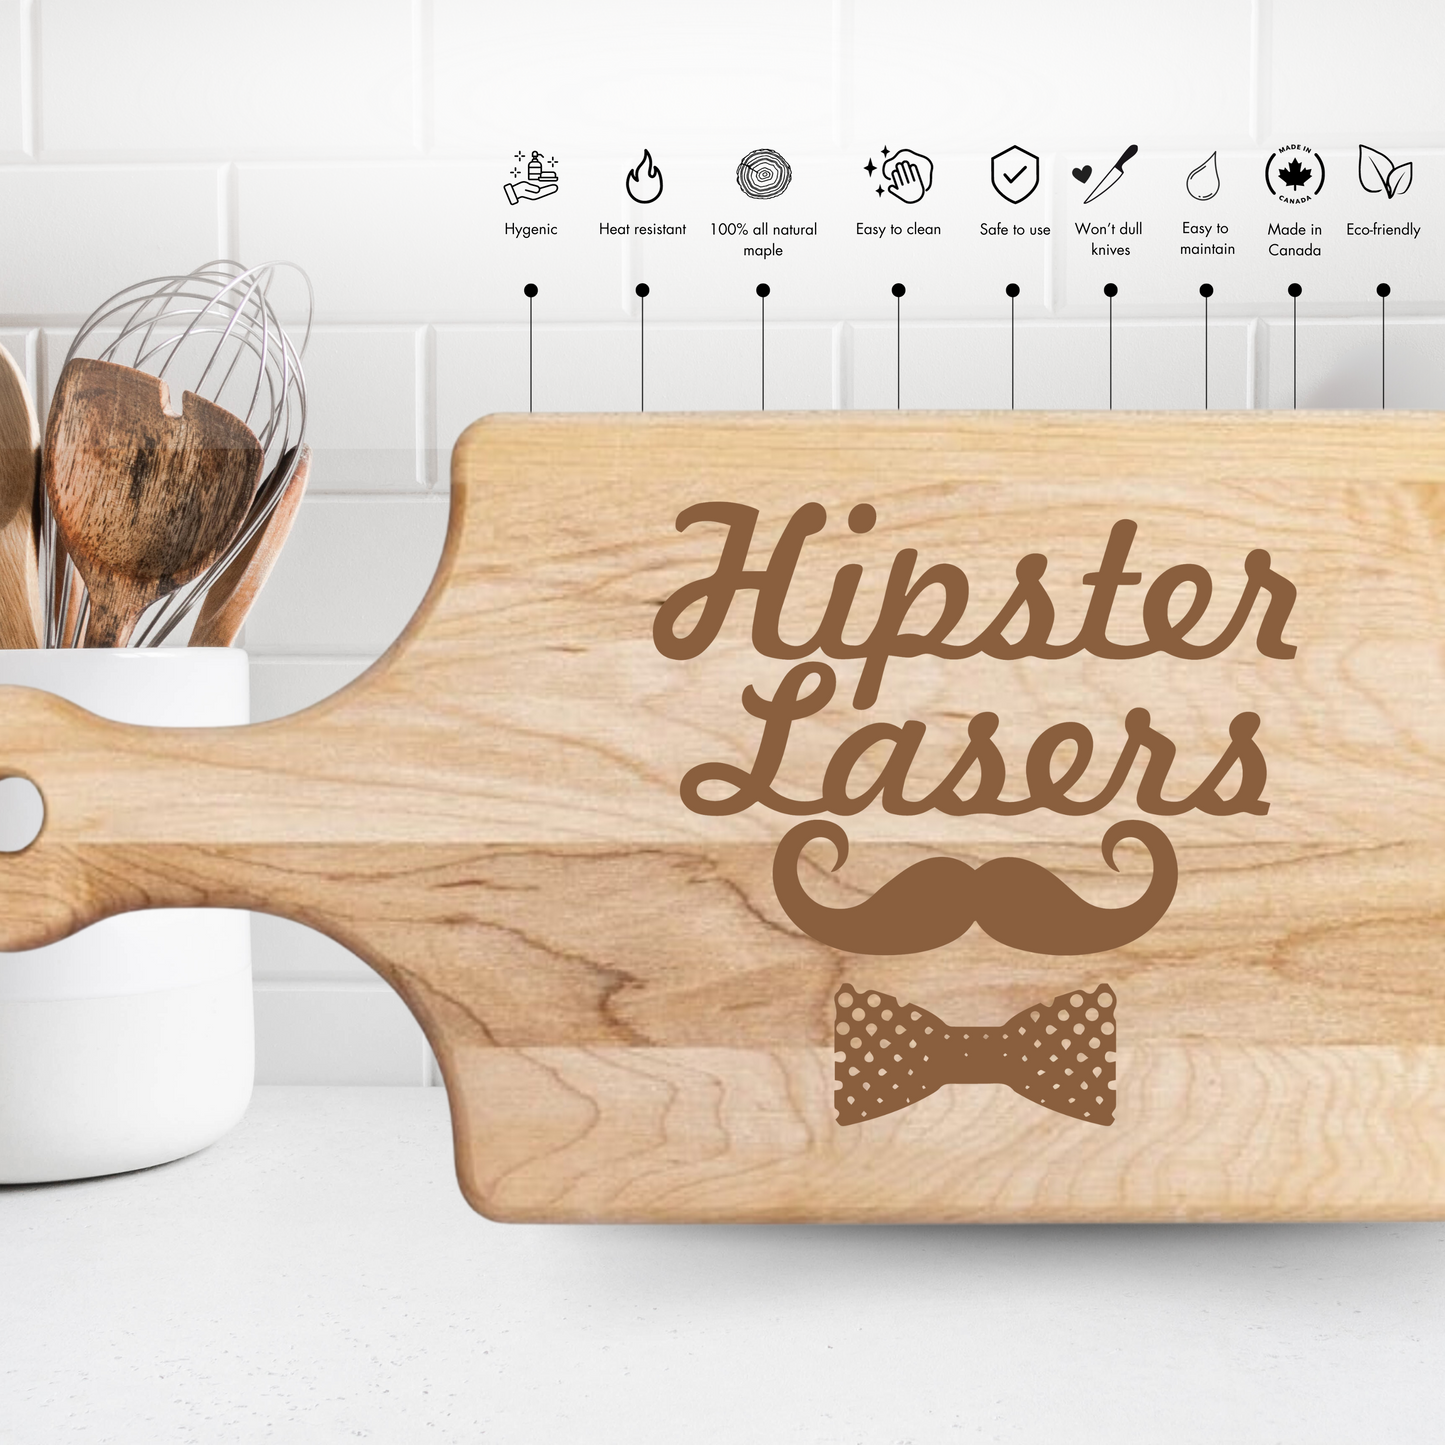 Your Cooking Is Over 9000 Cutting Board! - Premium Cutting Boards from Hipster Lasers - Just $70! Shop now at Hipster Lasers